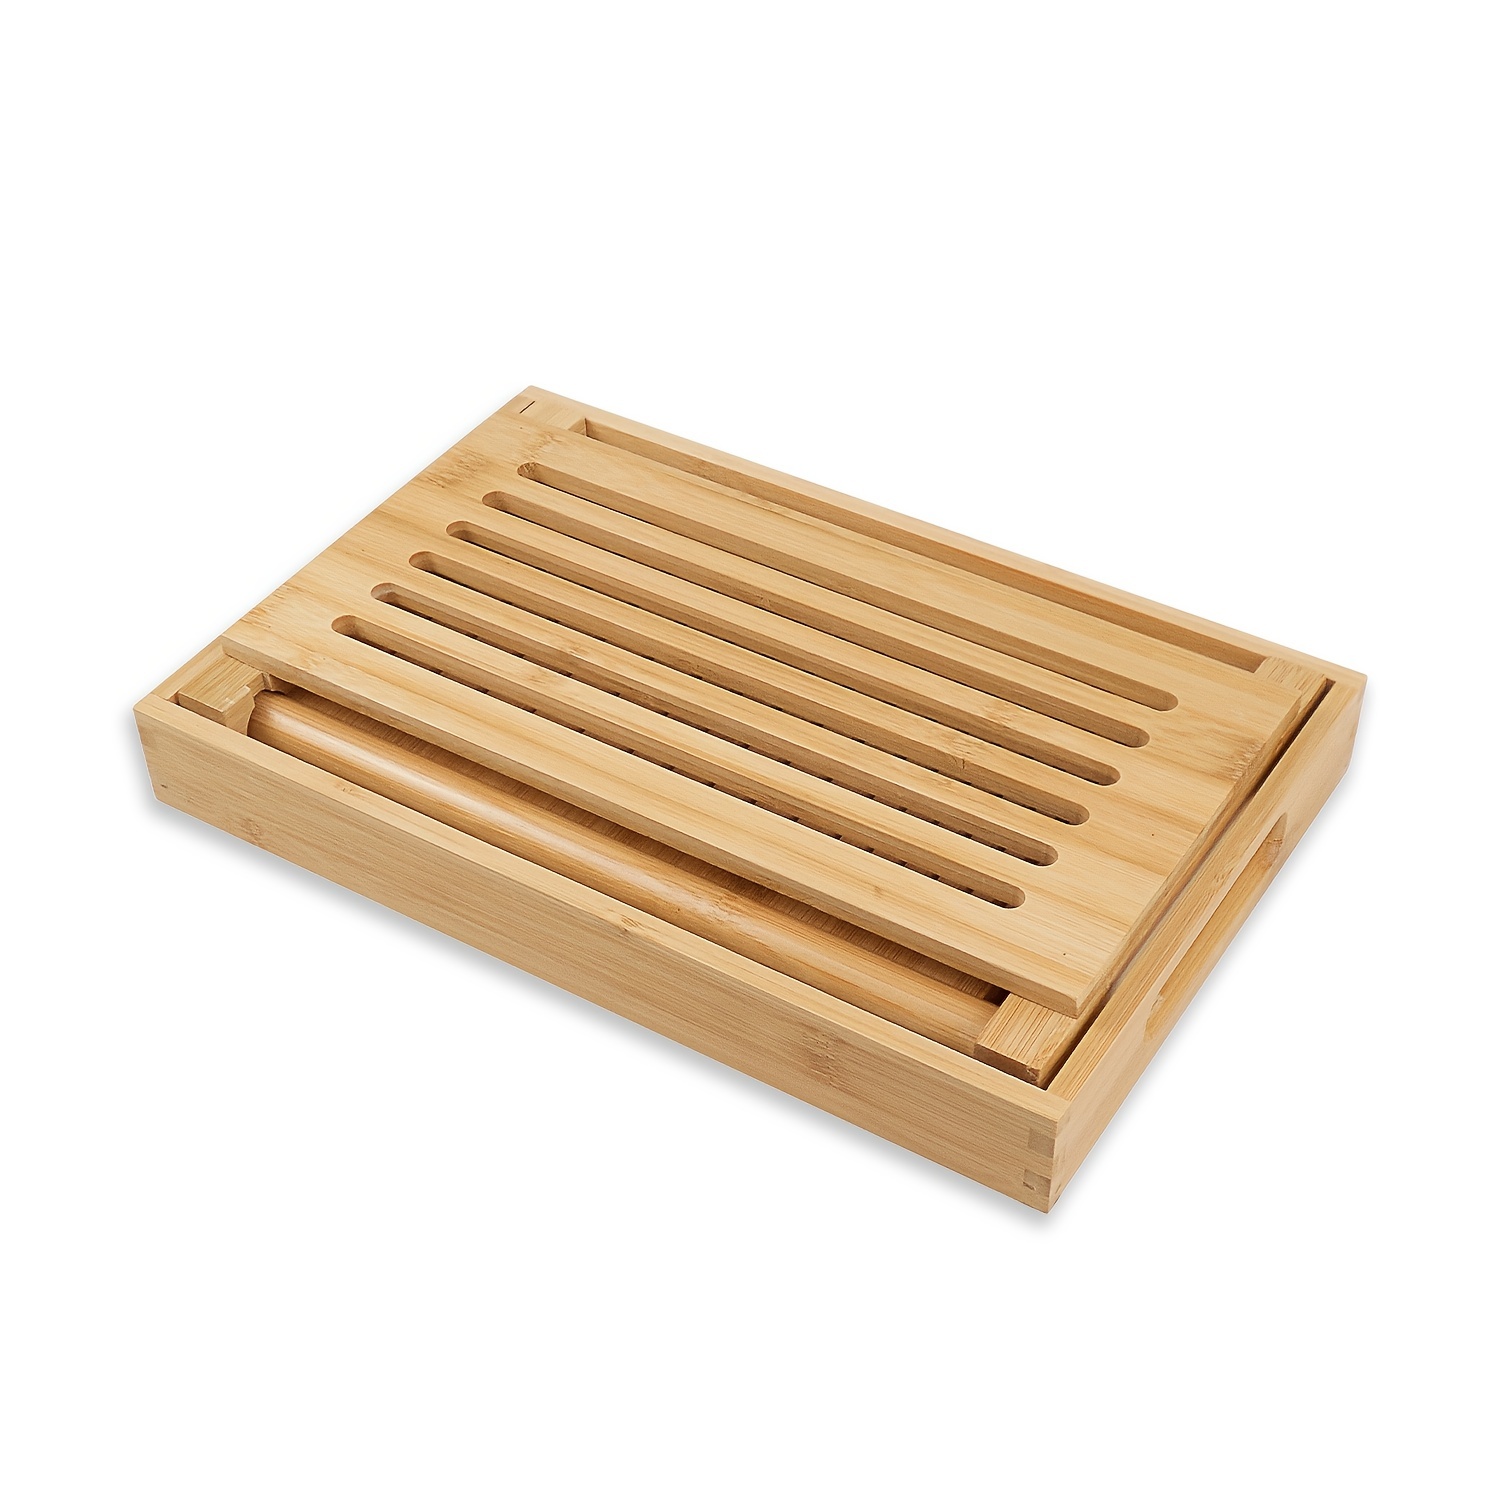 Buy Homemade Bread Loaf Slicer - Bamboo Wood Cutter Box with